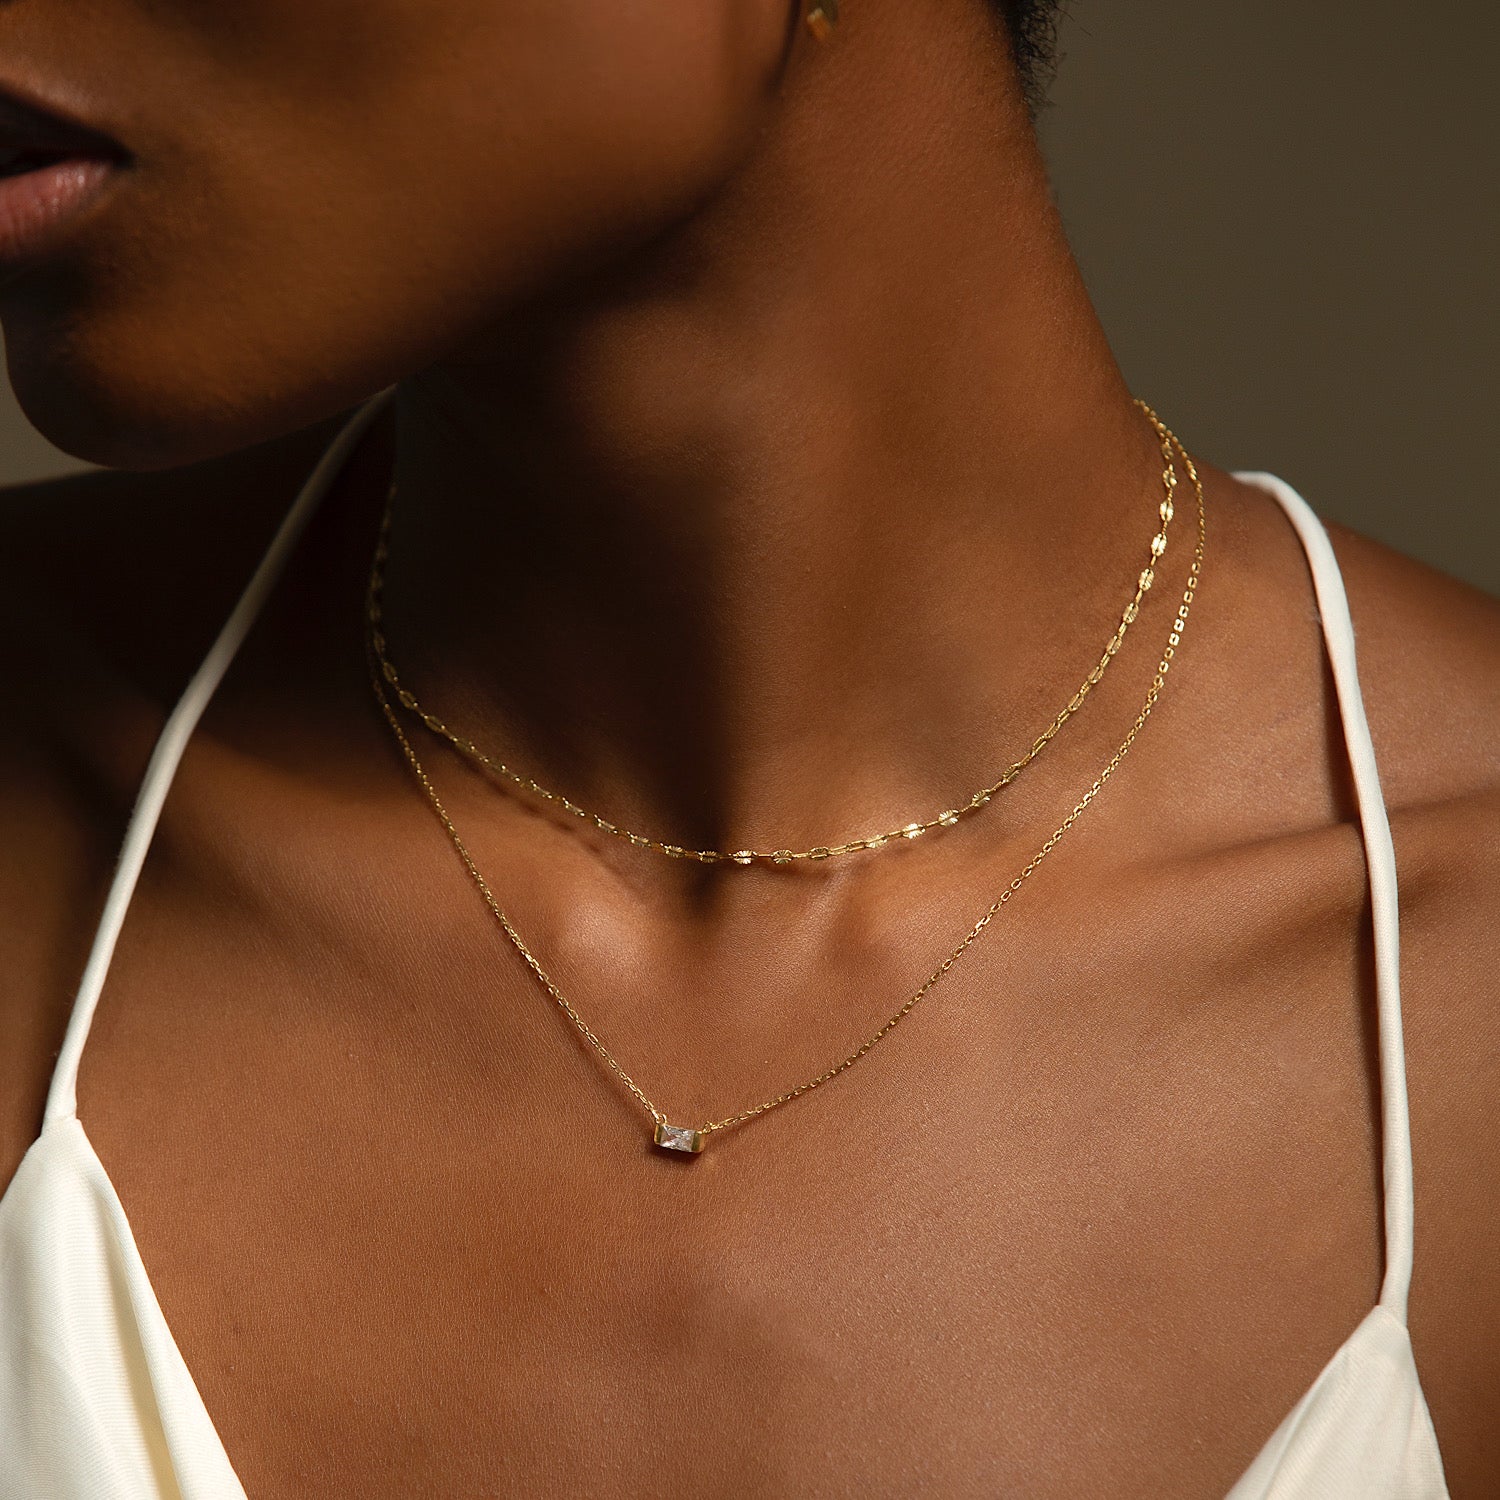 Gold Choker Necklace, Dainty Layered Choker for Women, Layered Necklace